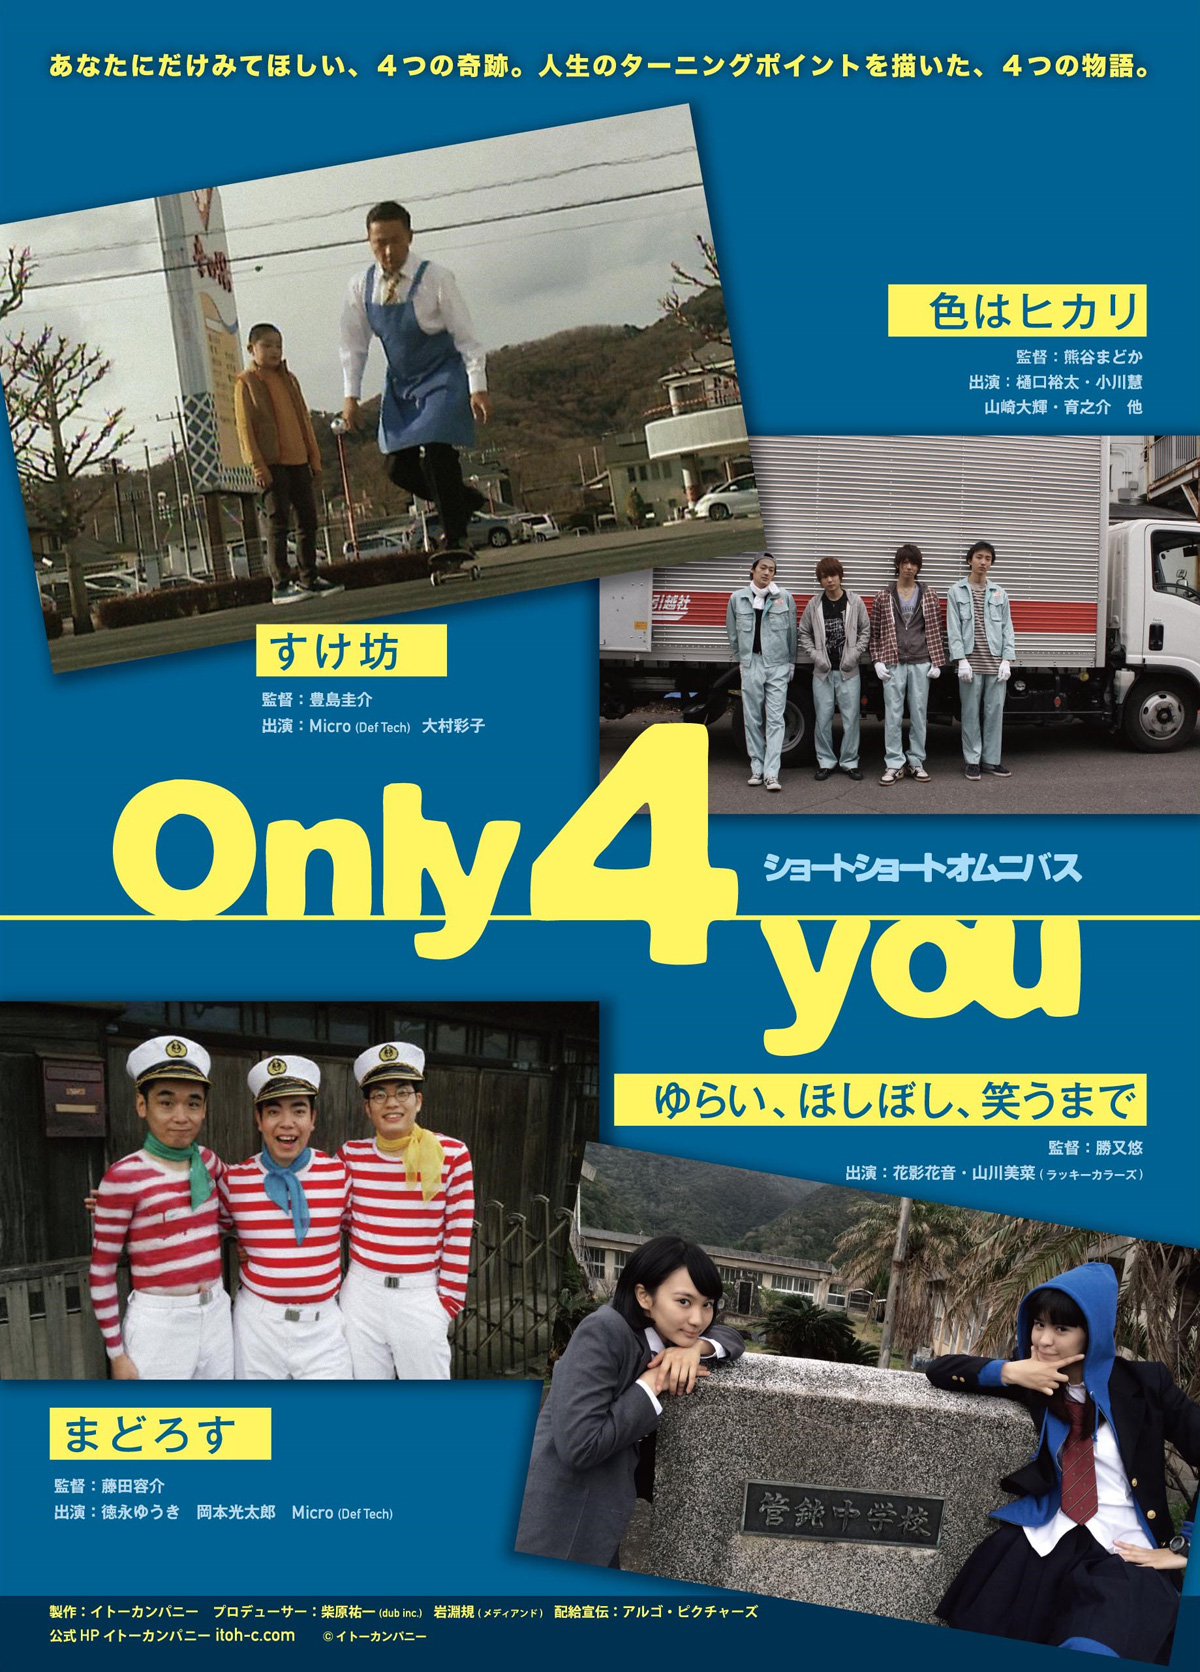 Only 4 youの画像